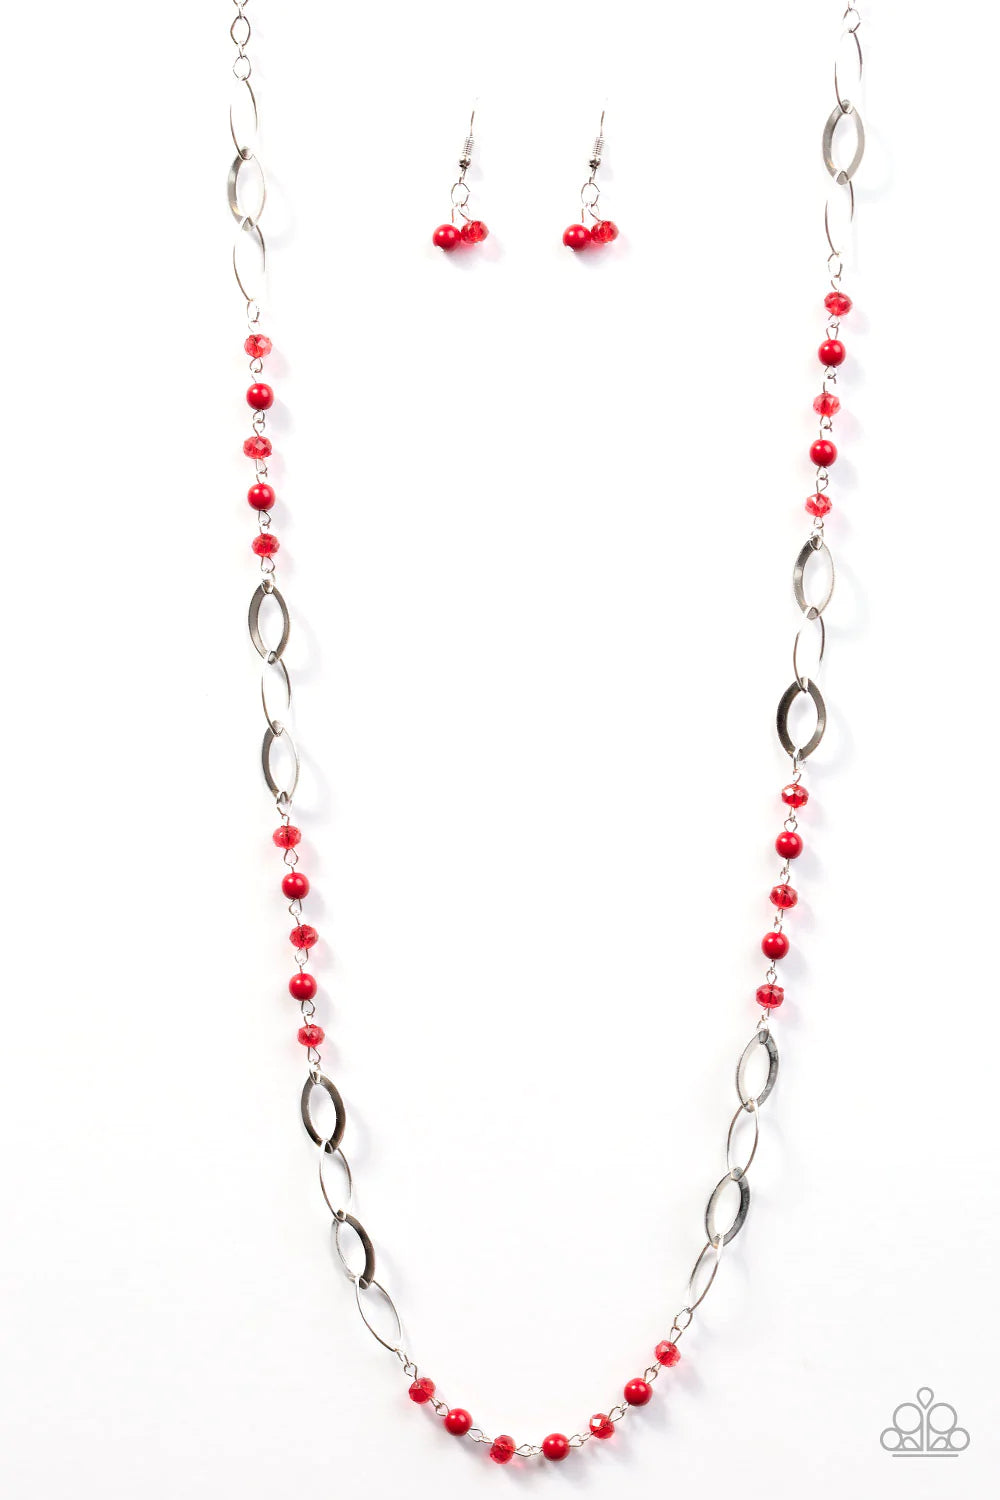 Paparazzi Necklace ~ Sparkling Sophistication - Red